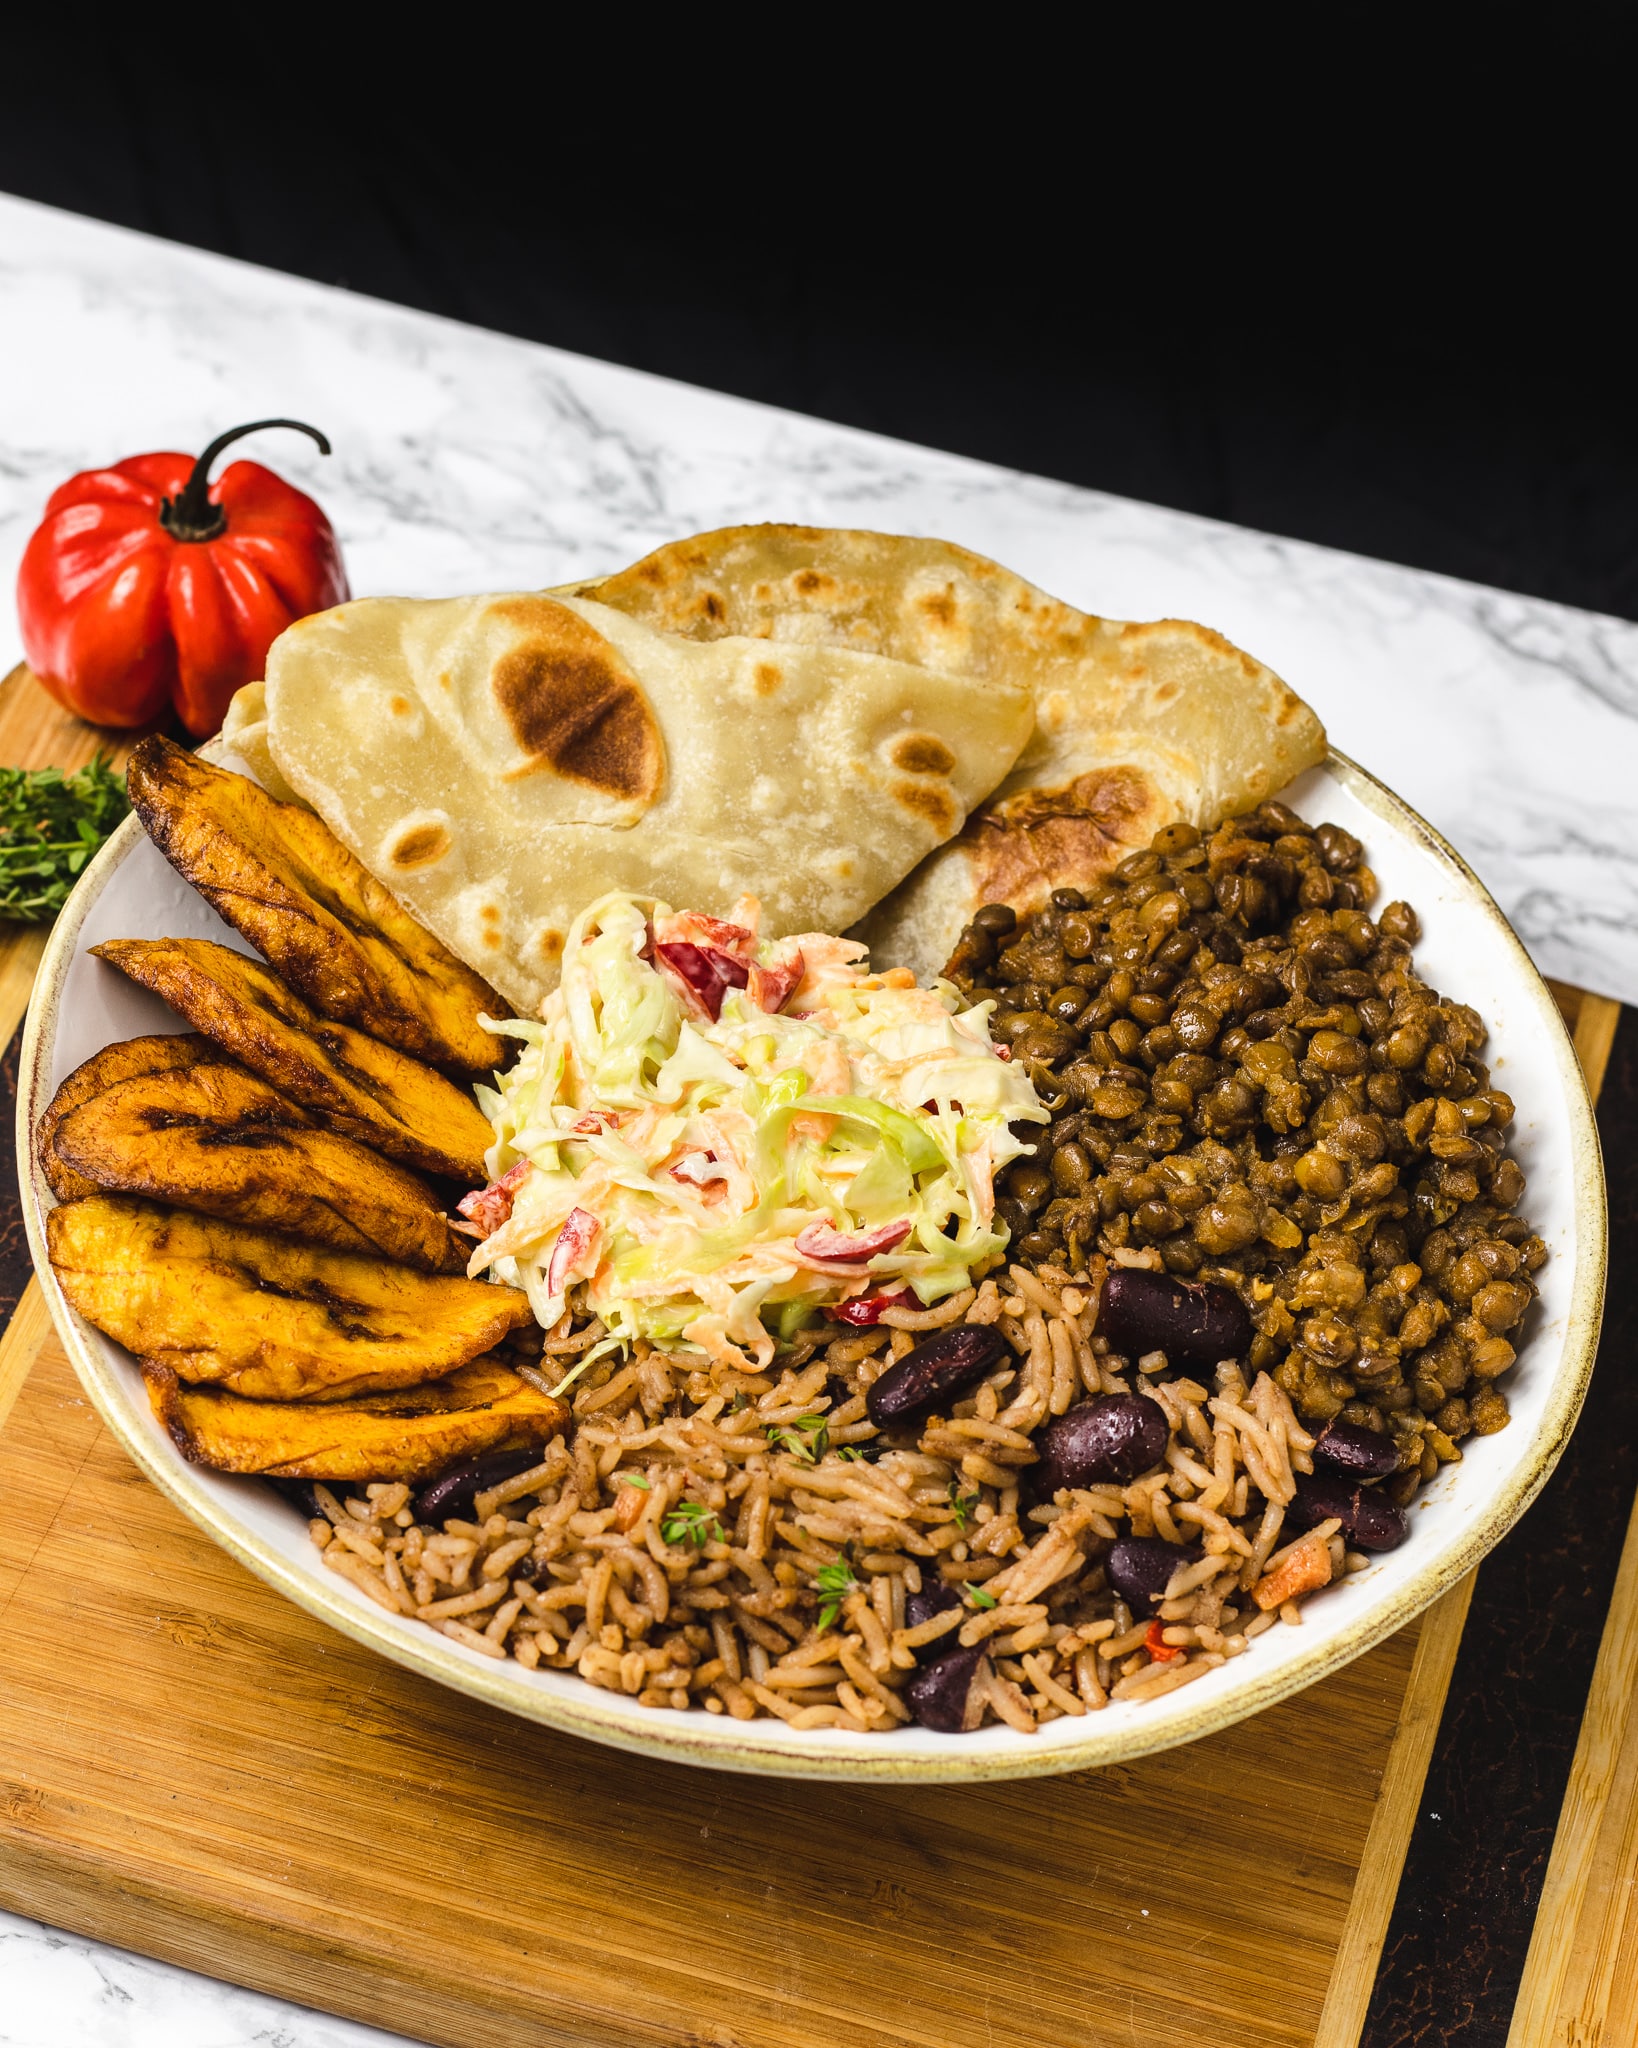 Chefiesta – African Caribbean Events and Wedding Caterer UK